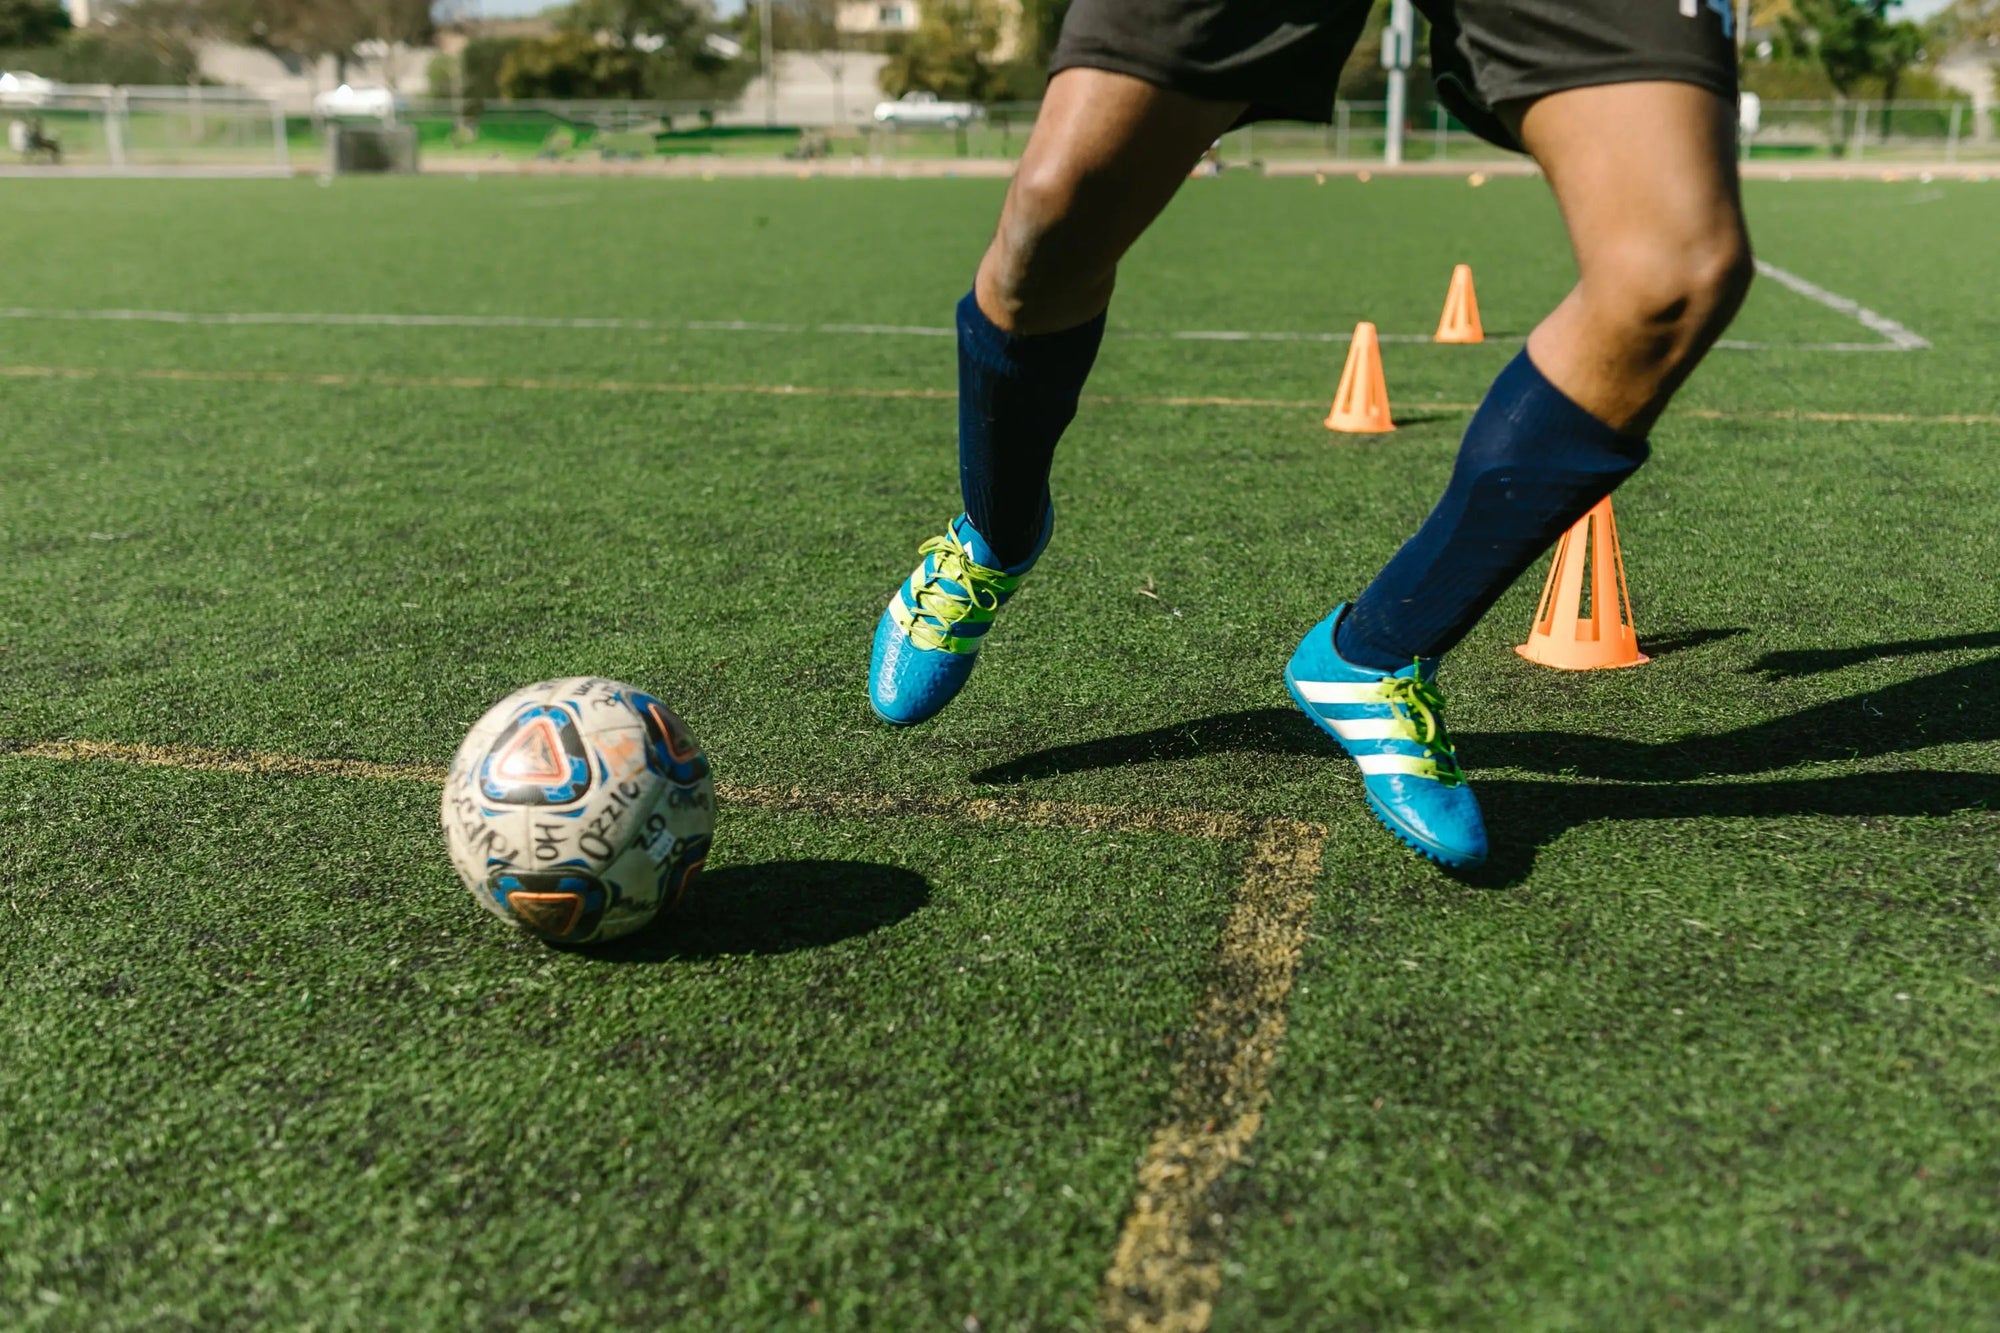 Top Soccer Drills For Kids: Improve Your Child Skills